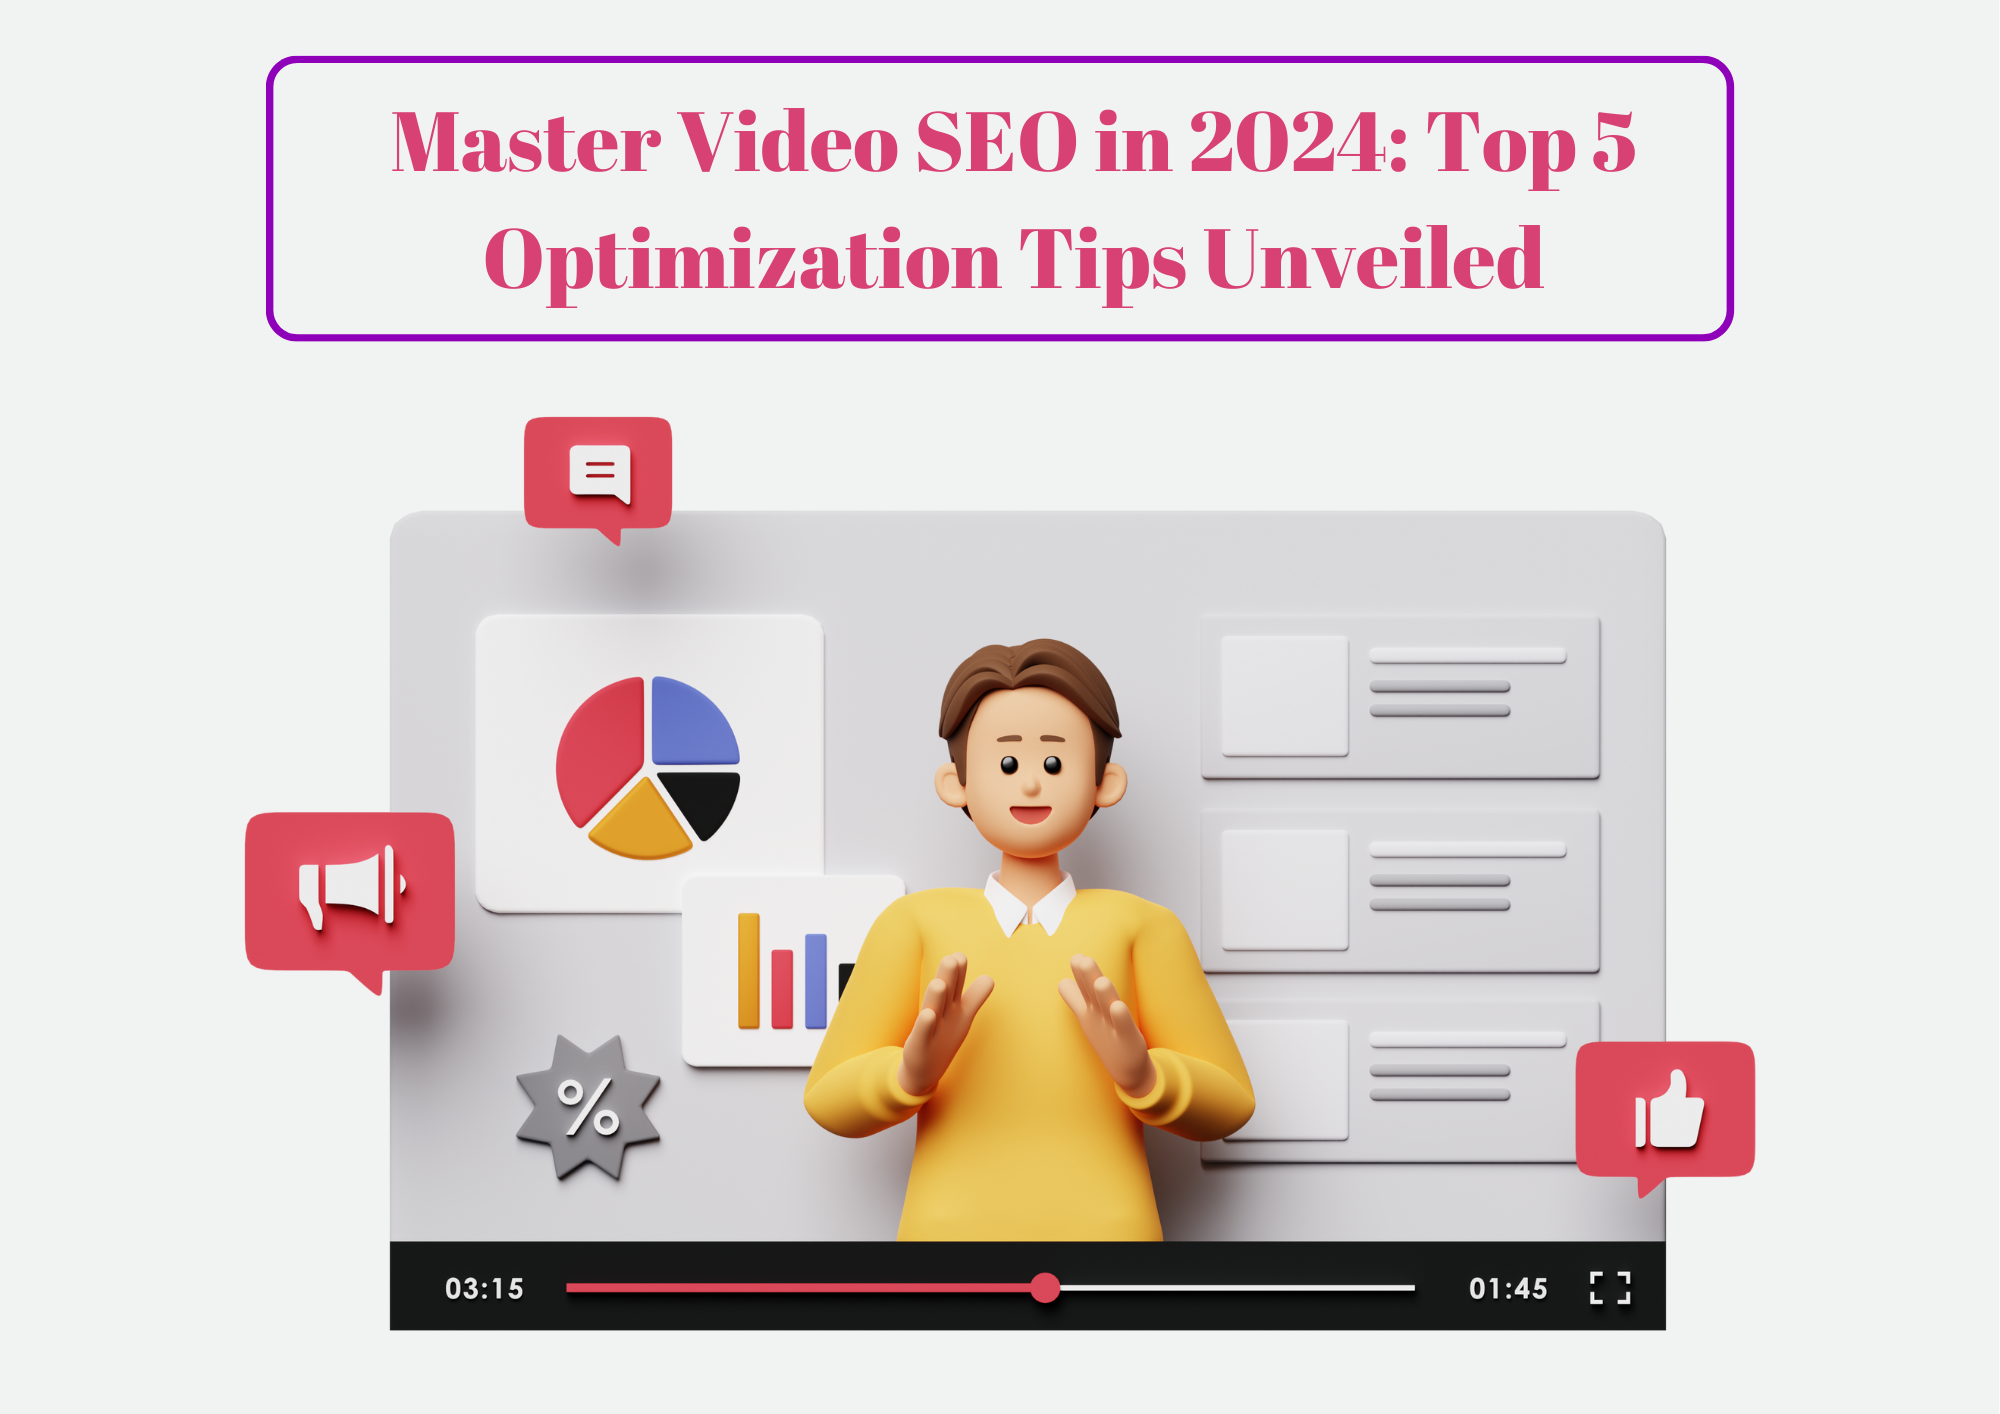 Master Video SEO in 2024 Top 5 Optimization Tips Unveiled